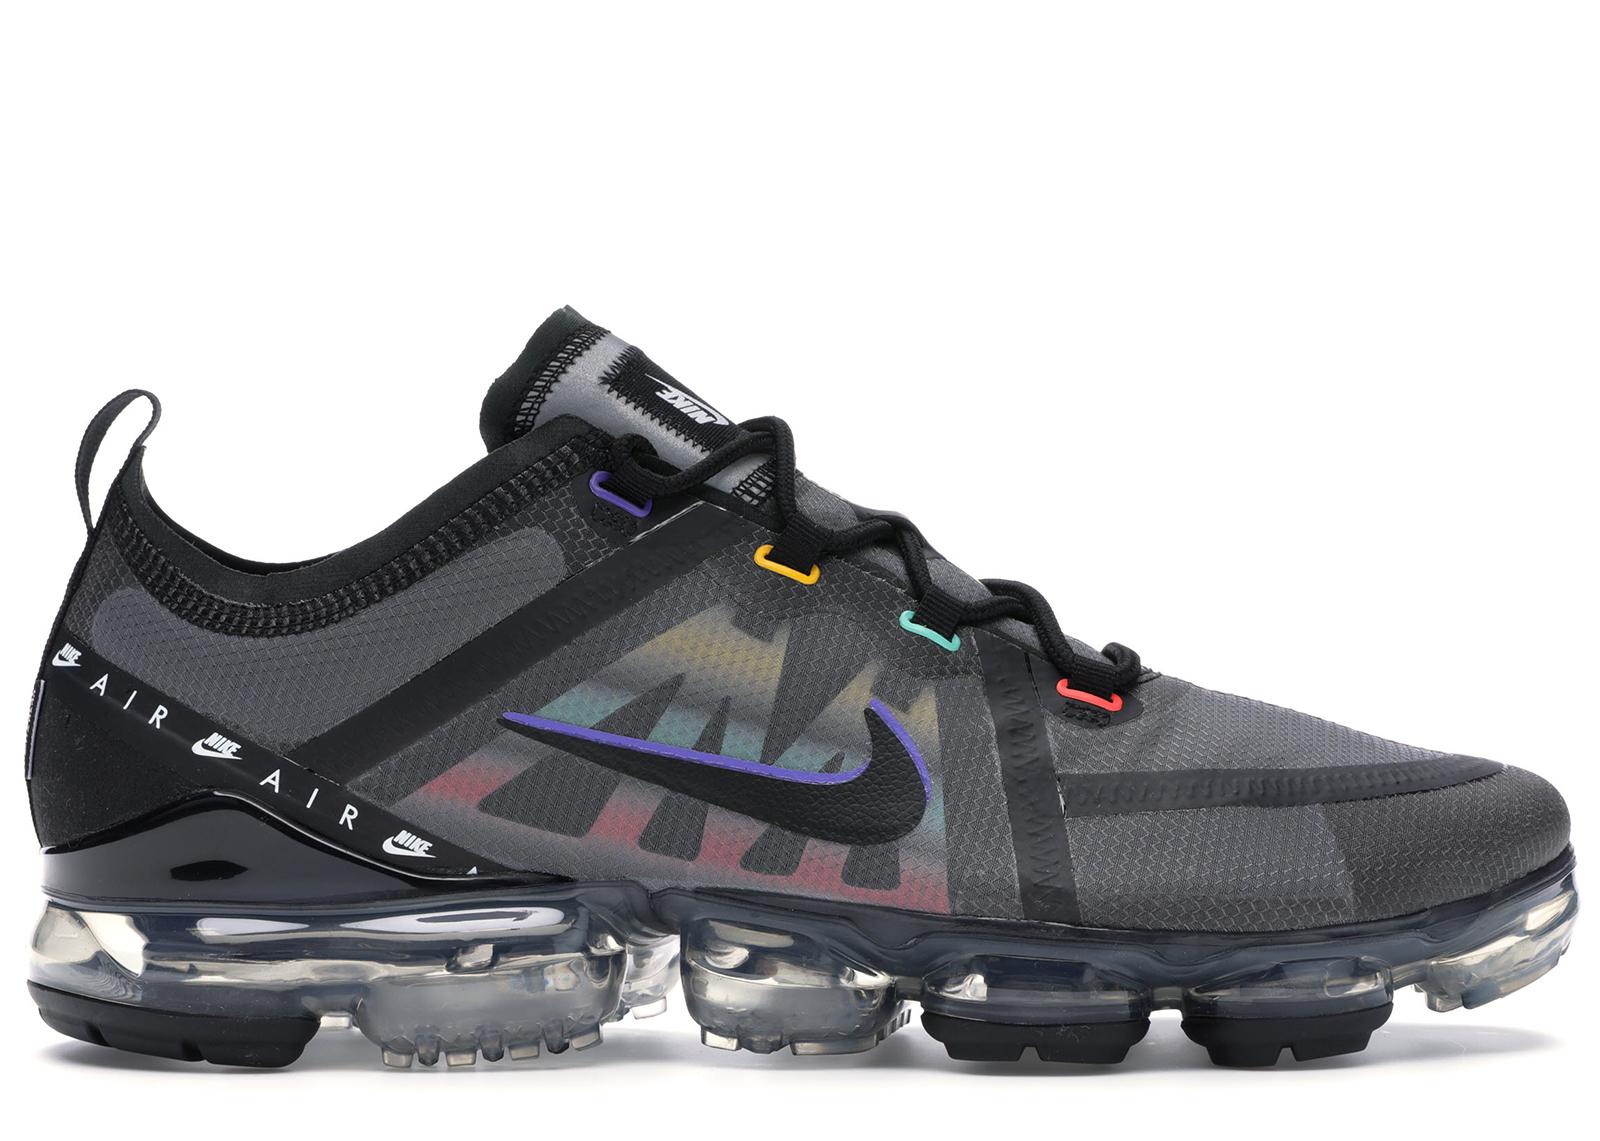 Nike Rubber Air Vapormax Trainers in 